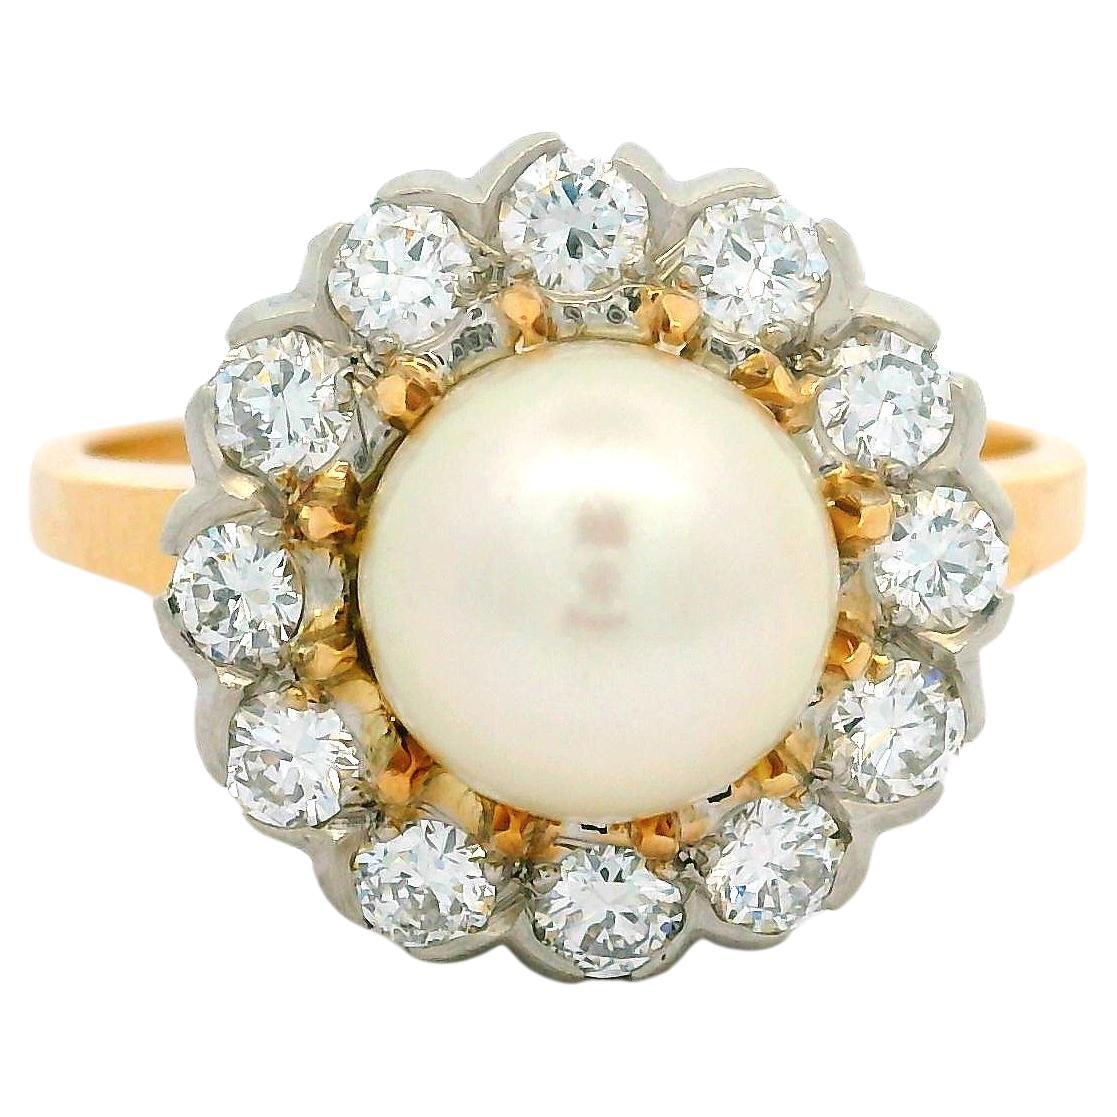 Vintage 14k Yellow Gold Cultured Pearl Center Old Transitional Diamond Halo Ring